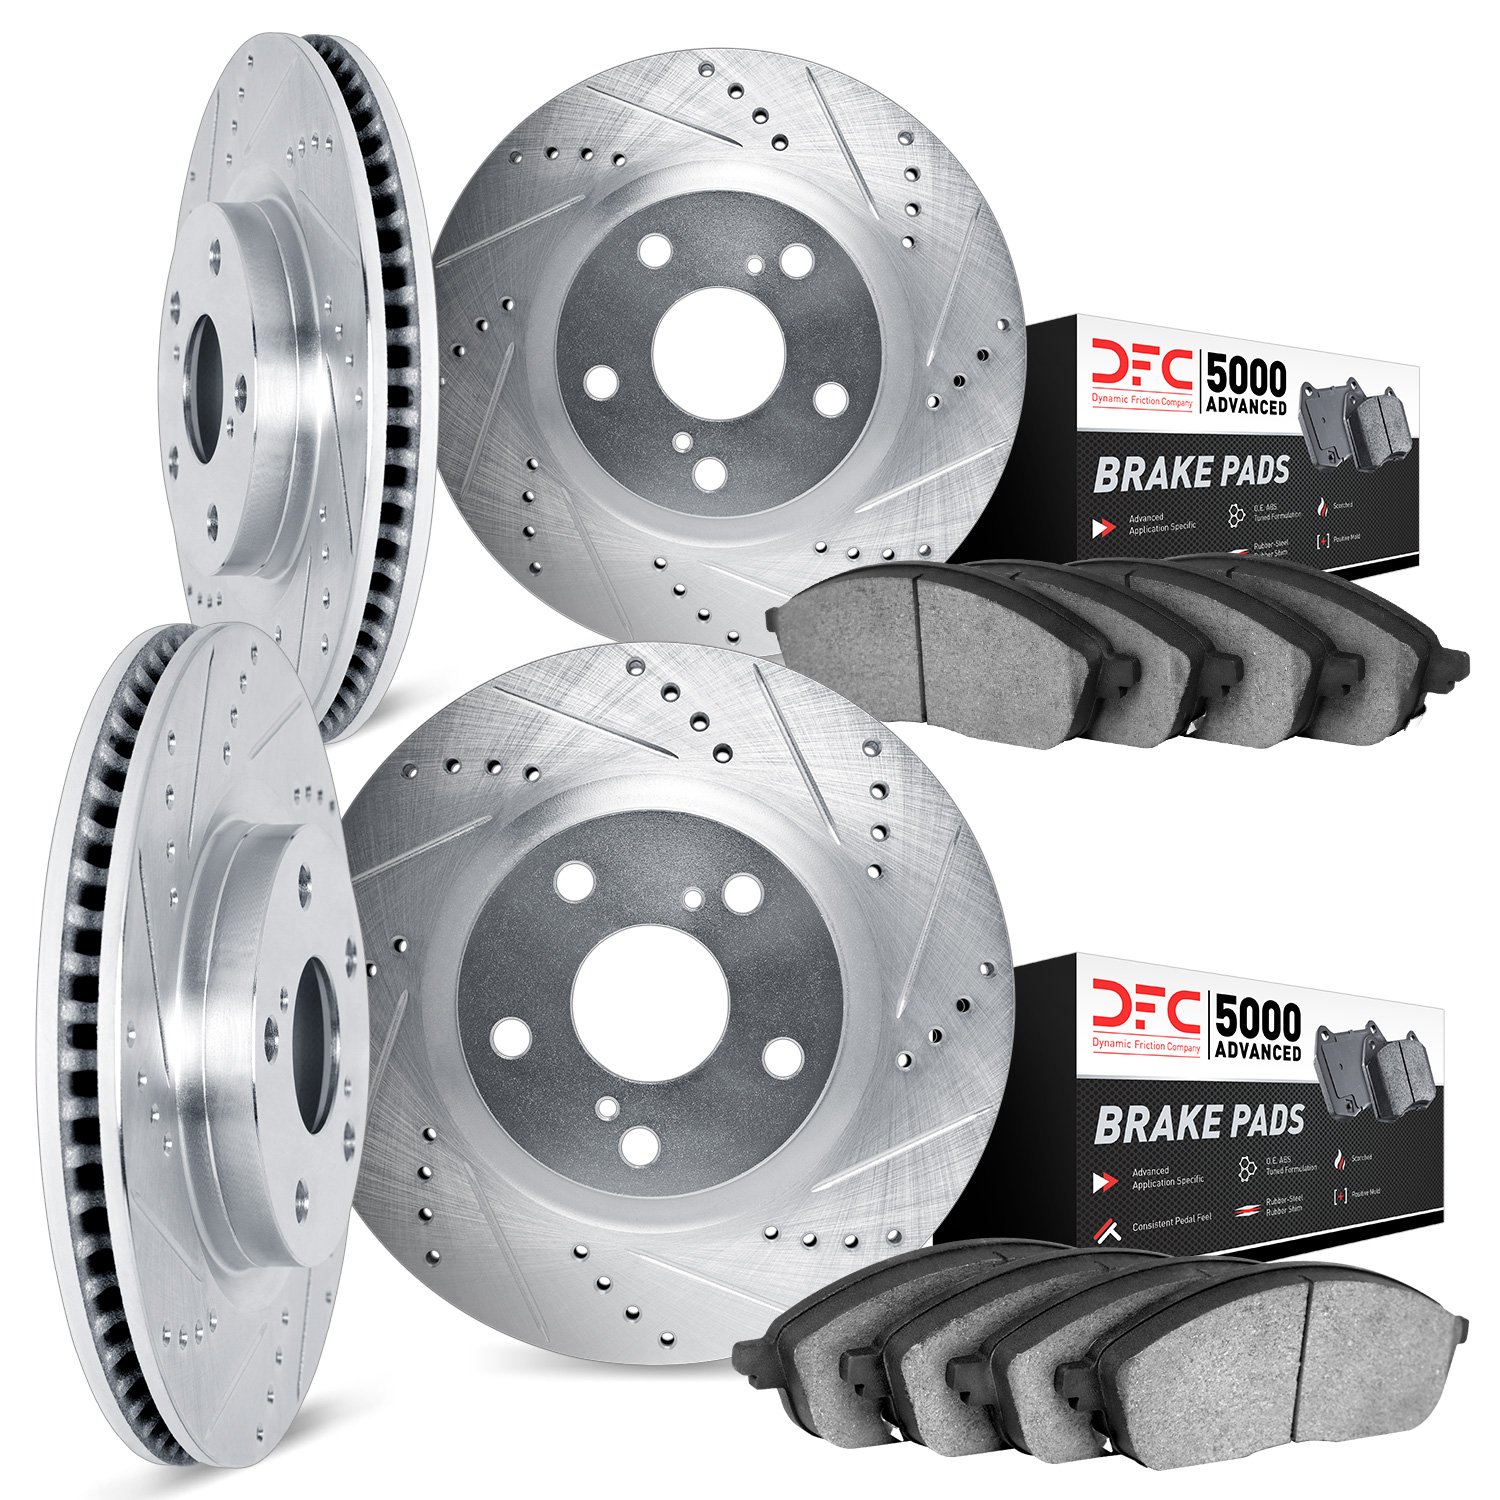 7504-74065 Drilled/Slotted Brake Rotors w/5000 Advanced Brake Pads Kit [Silver], 2004-2005 Audi/Volkswagen, Position: Front and